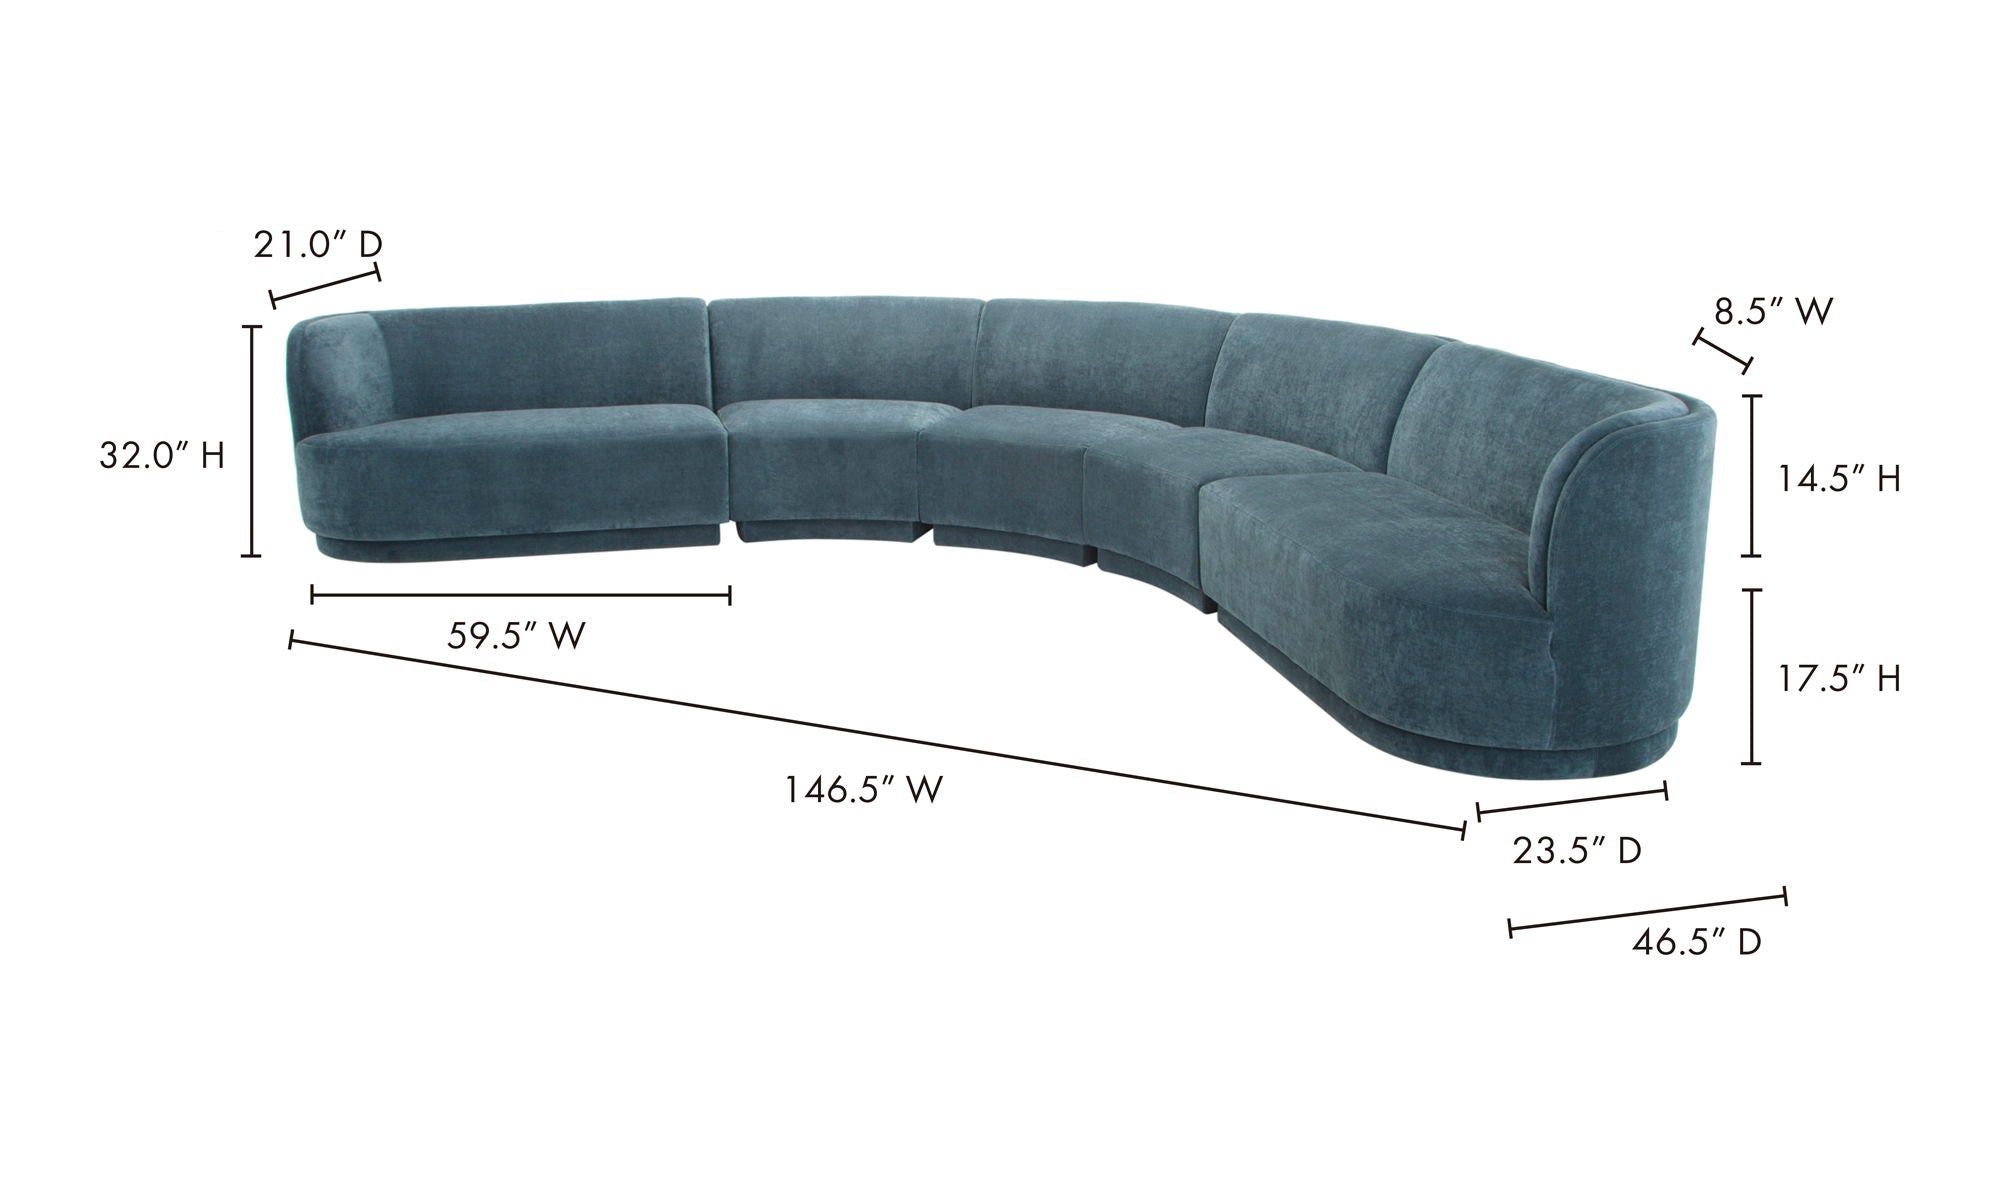 Yoon Radius Sectional - Blue Velvet, Modular Design-Stationary Sectionals-American Furniture Outlet